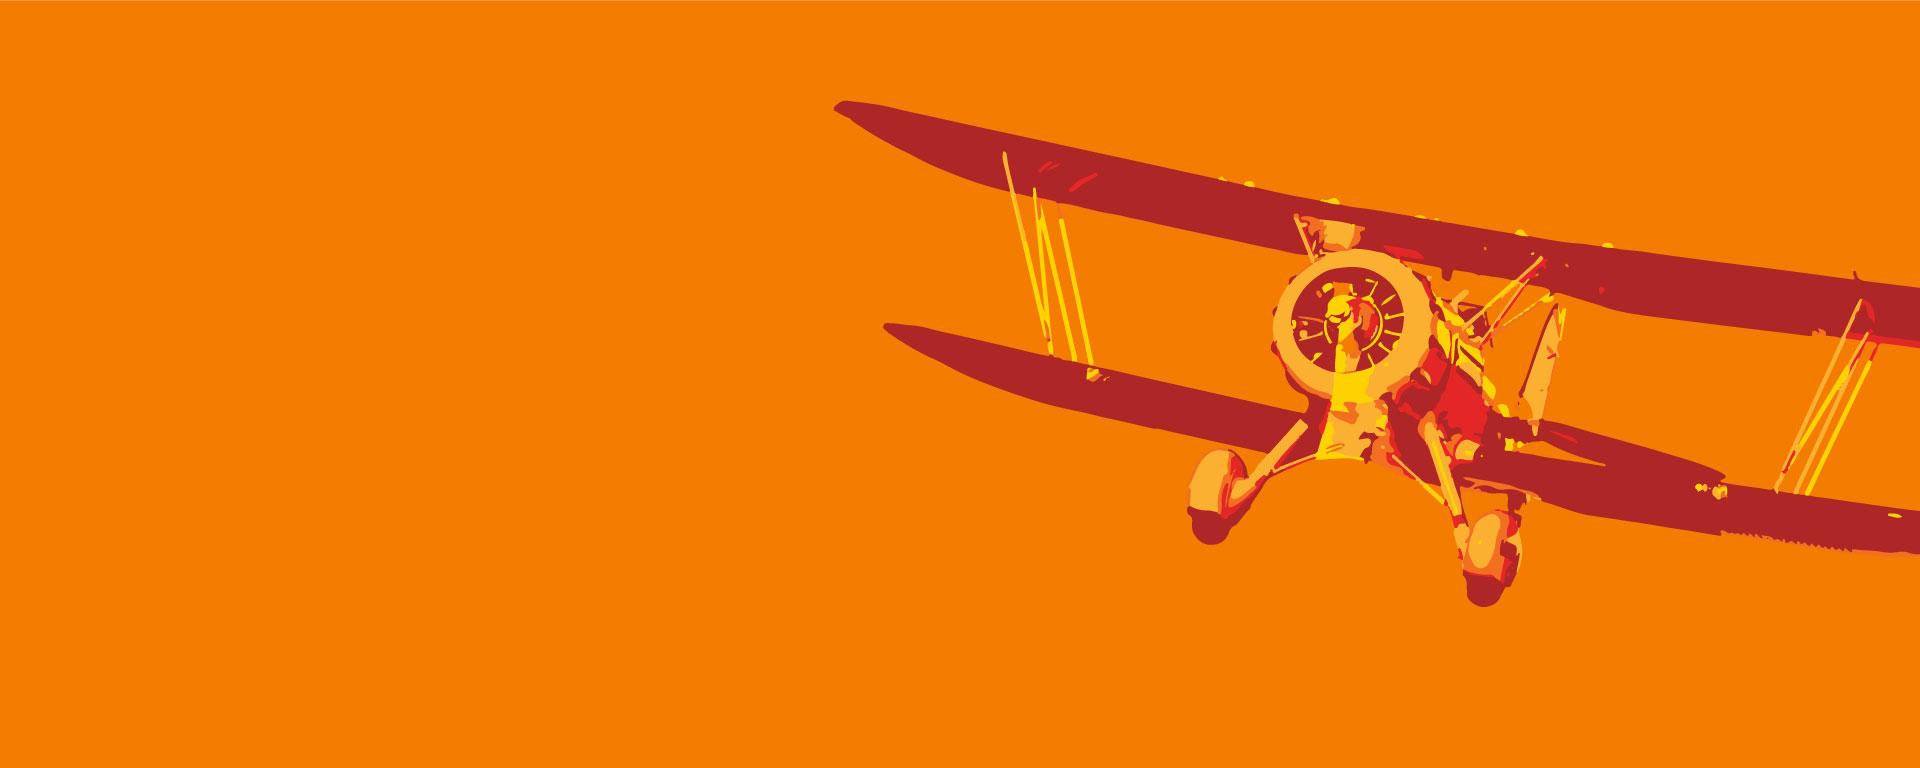 Image of an old-style biplane flying over an orange background.